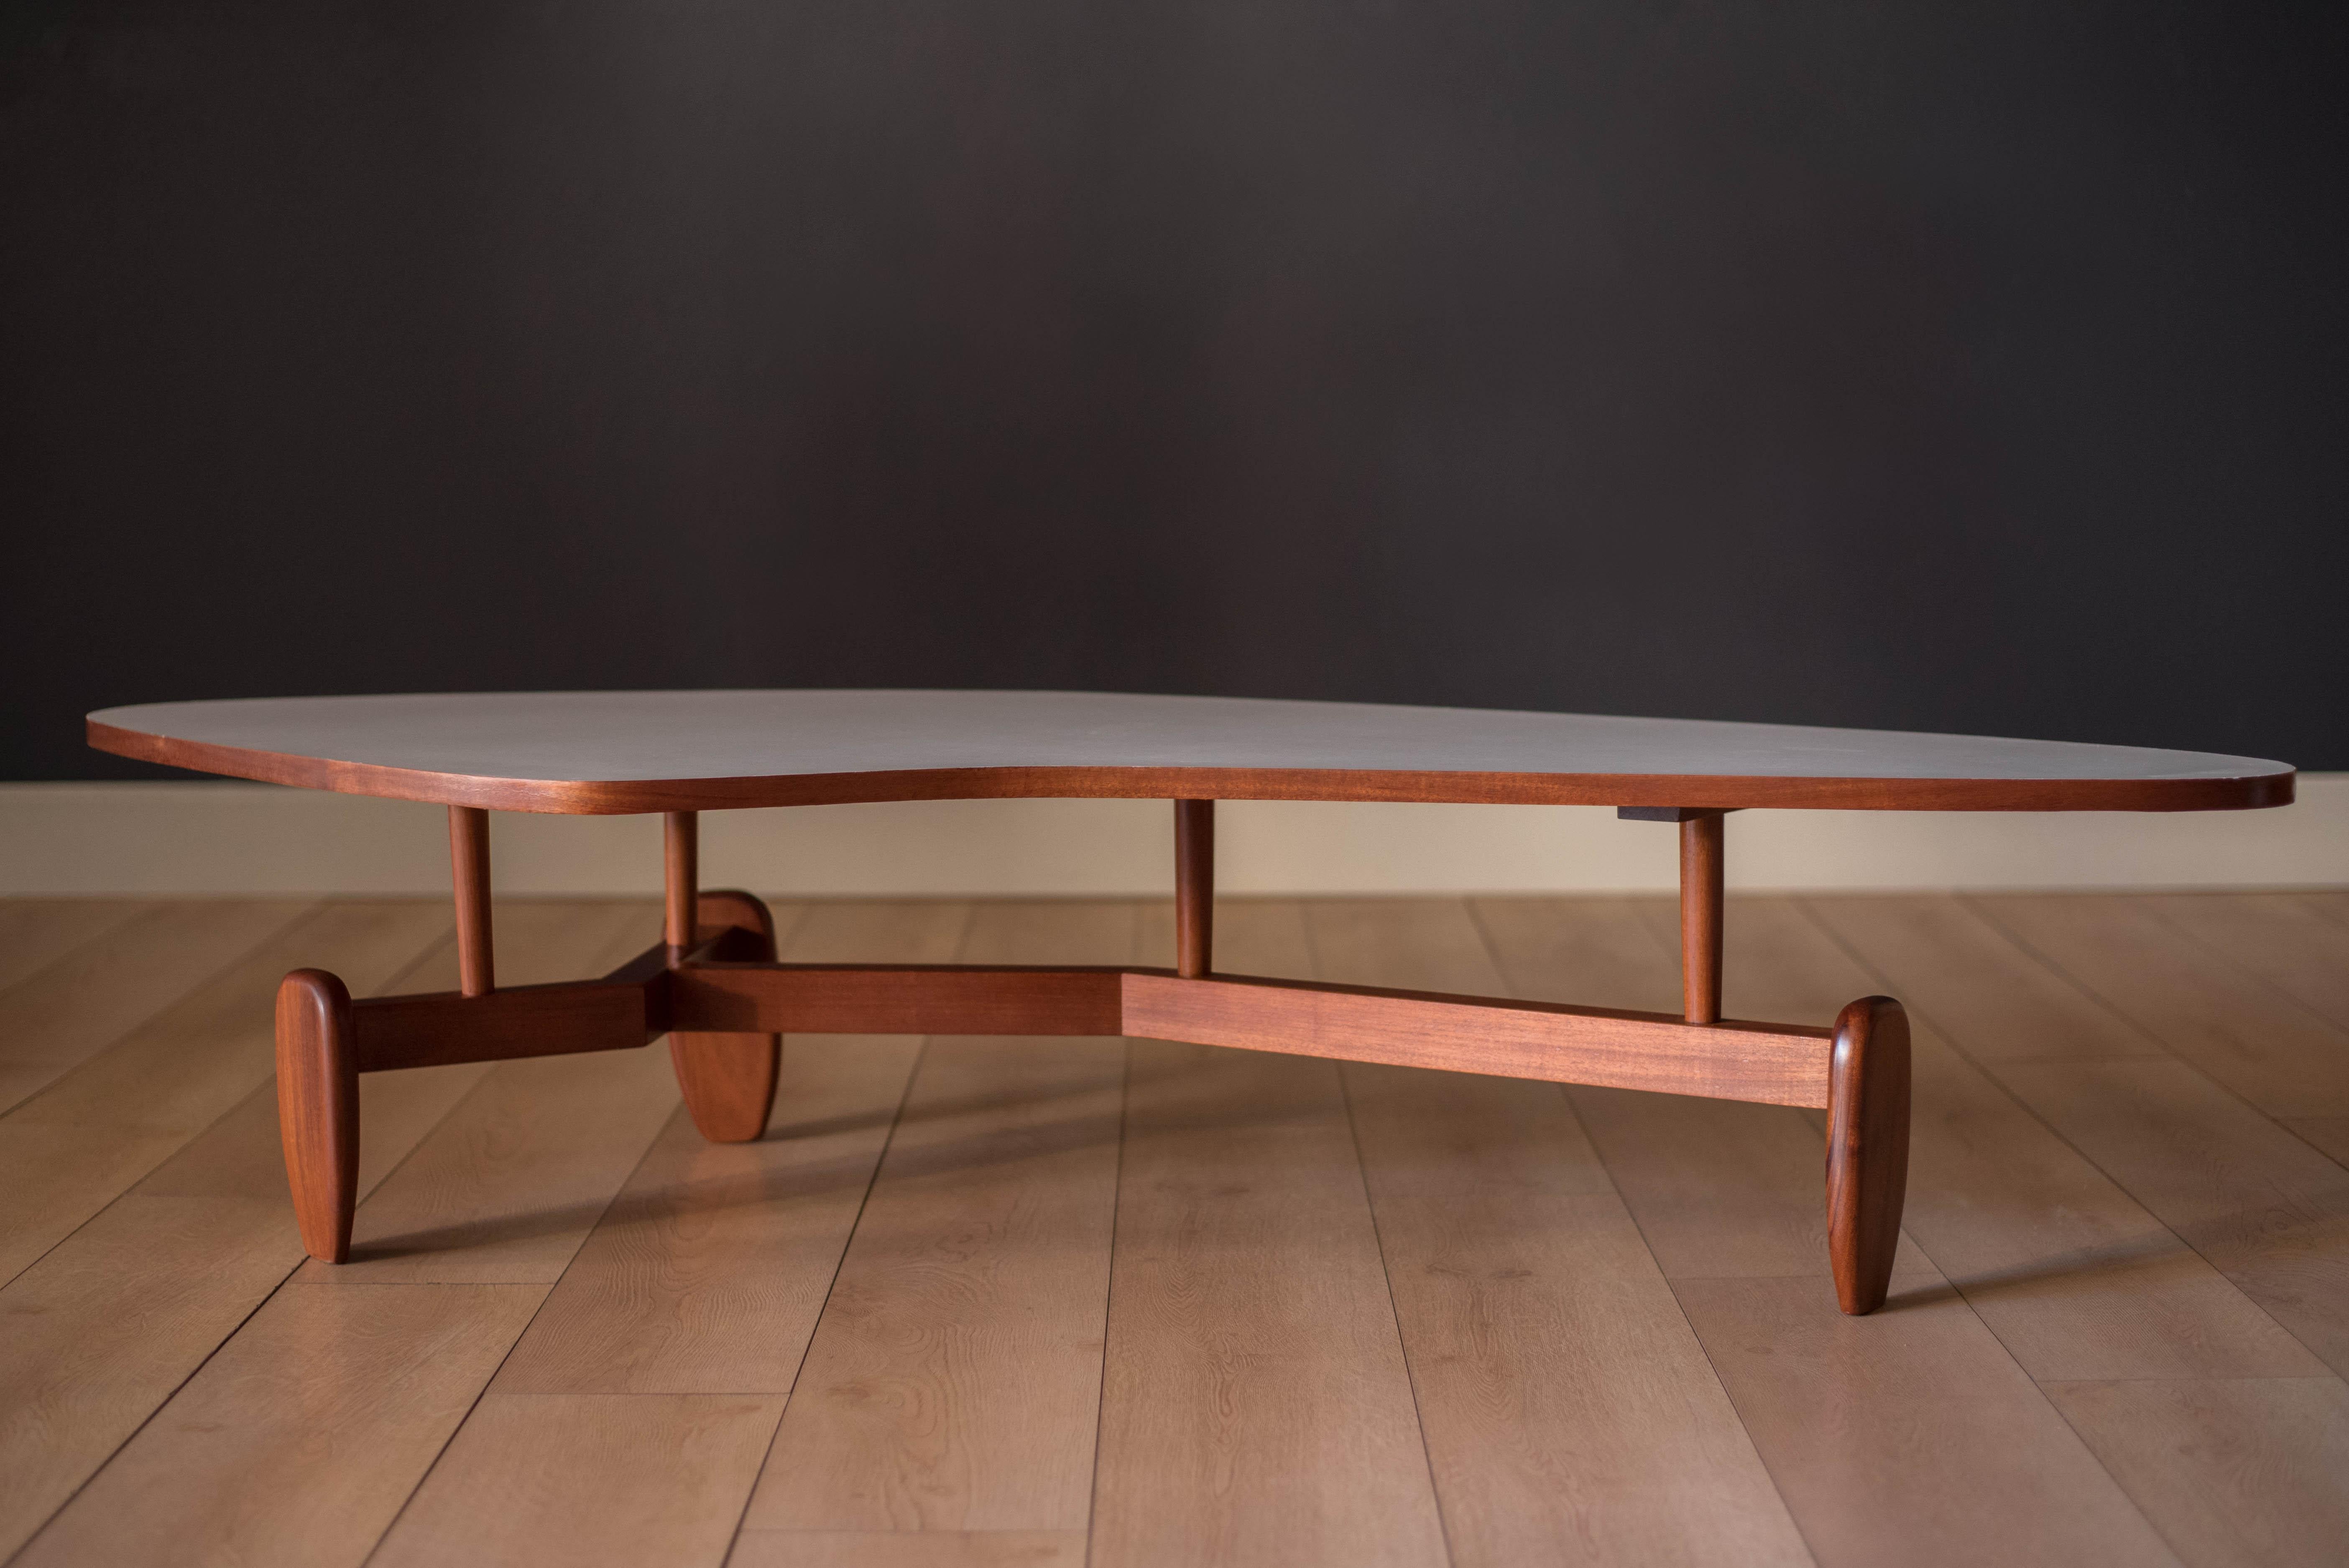 Vintage 'outrigger' coffee table designed by John Keal for Brown Saltman of California, circa 1950s. This conversation piece has a easy to maintain white laminate boomerang top with contrasting mahogany trim. Structural solid mahogany floating base